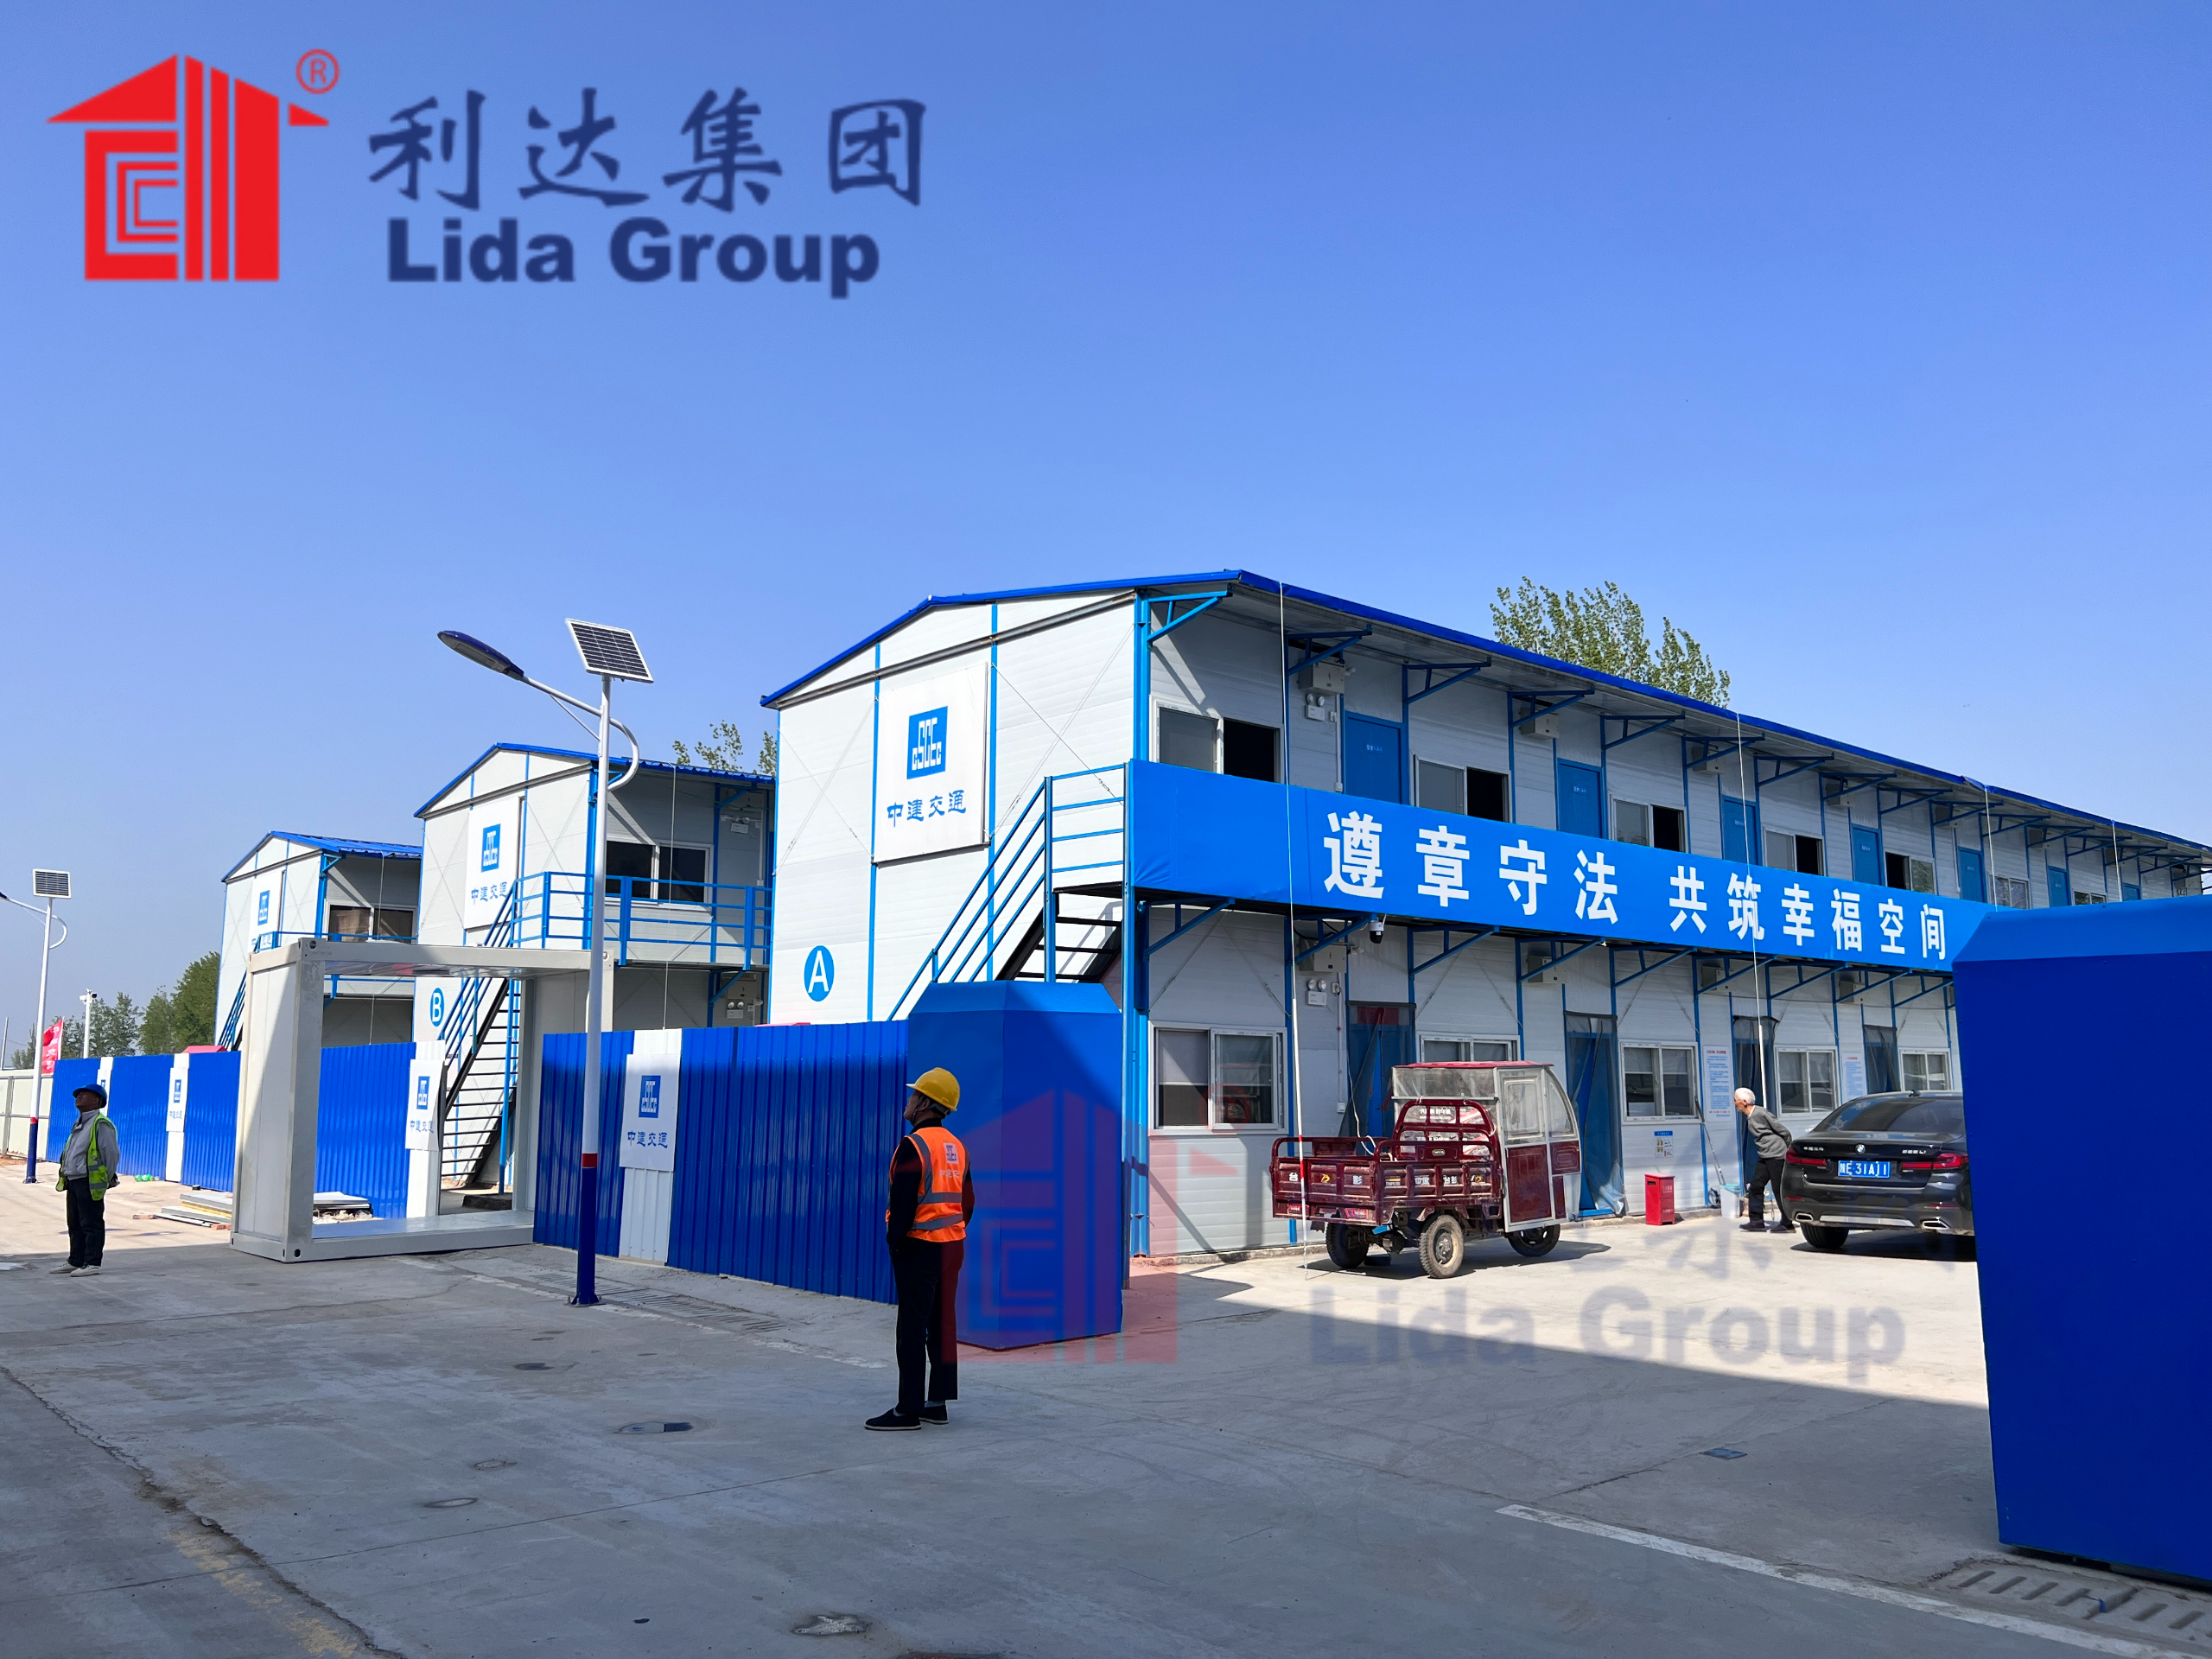 Government allocates funds to pilot temporary prefab complexes supplied by Lida Group featuring integrated renewable power systems, improved WASH facilities and communal units constructed from insulated sandwich panels.